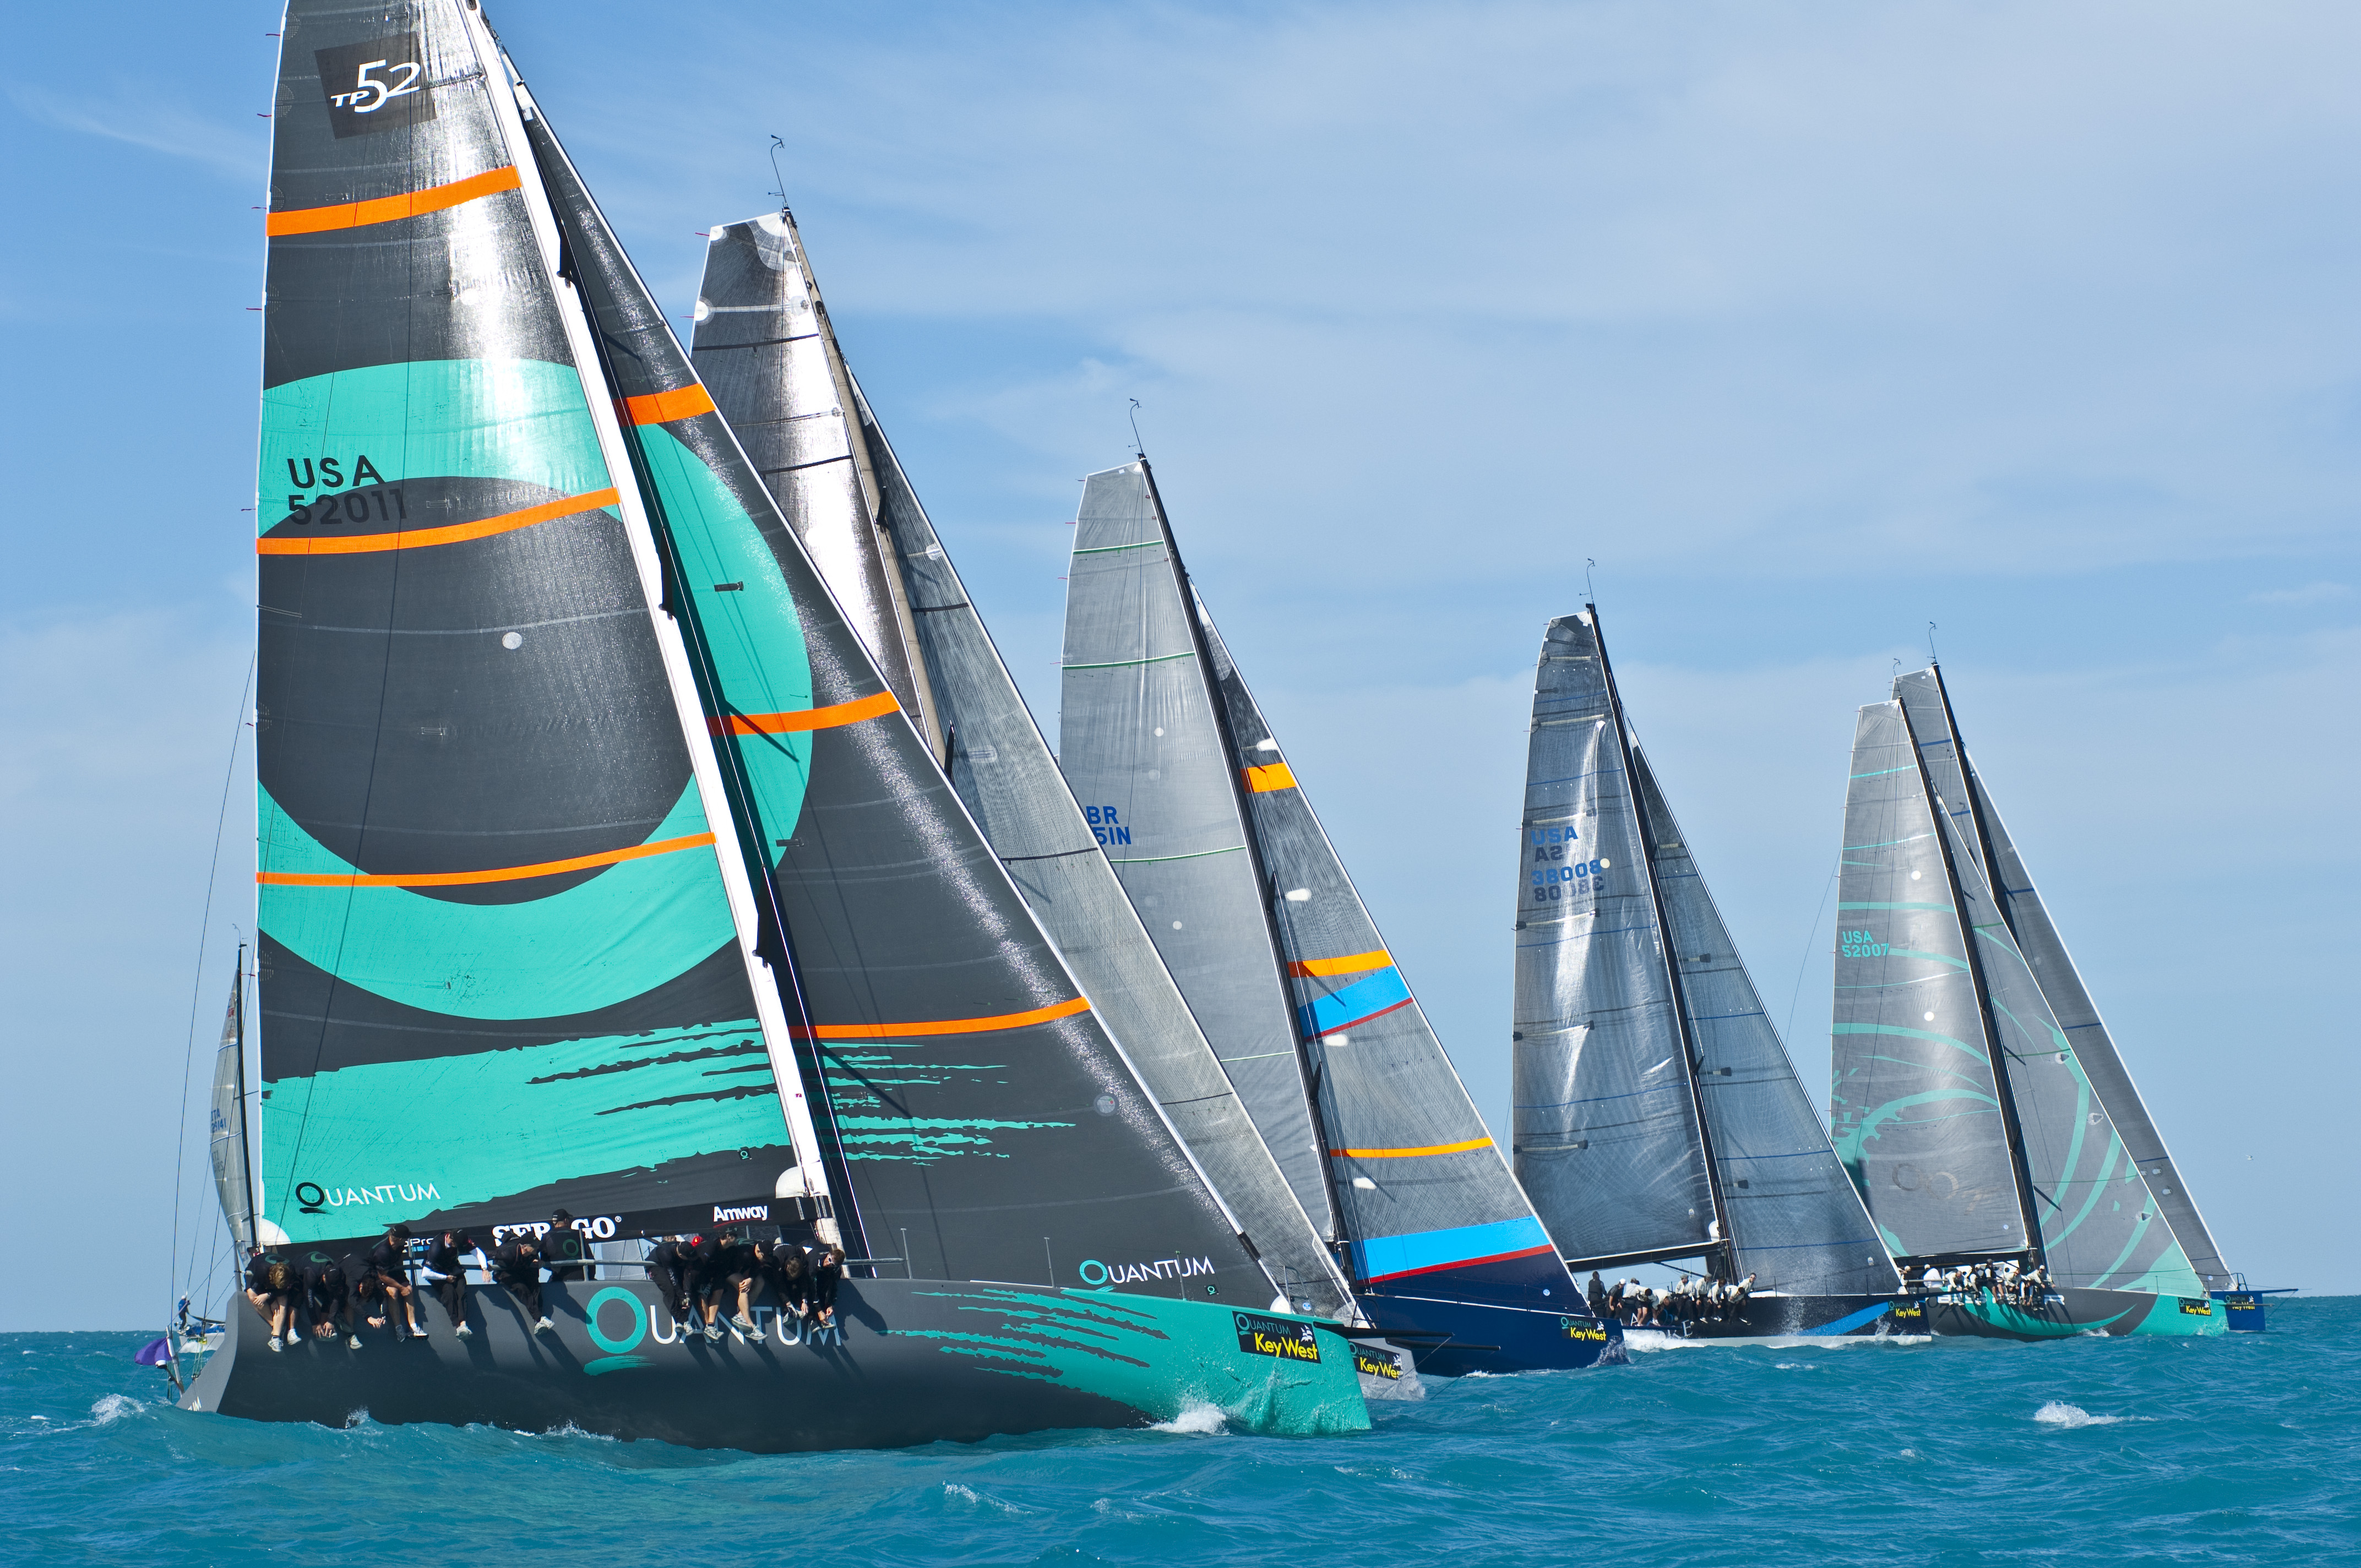 Gearing Up for Quantum Key West Race Week